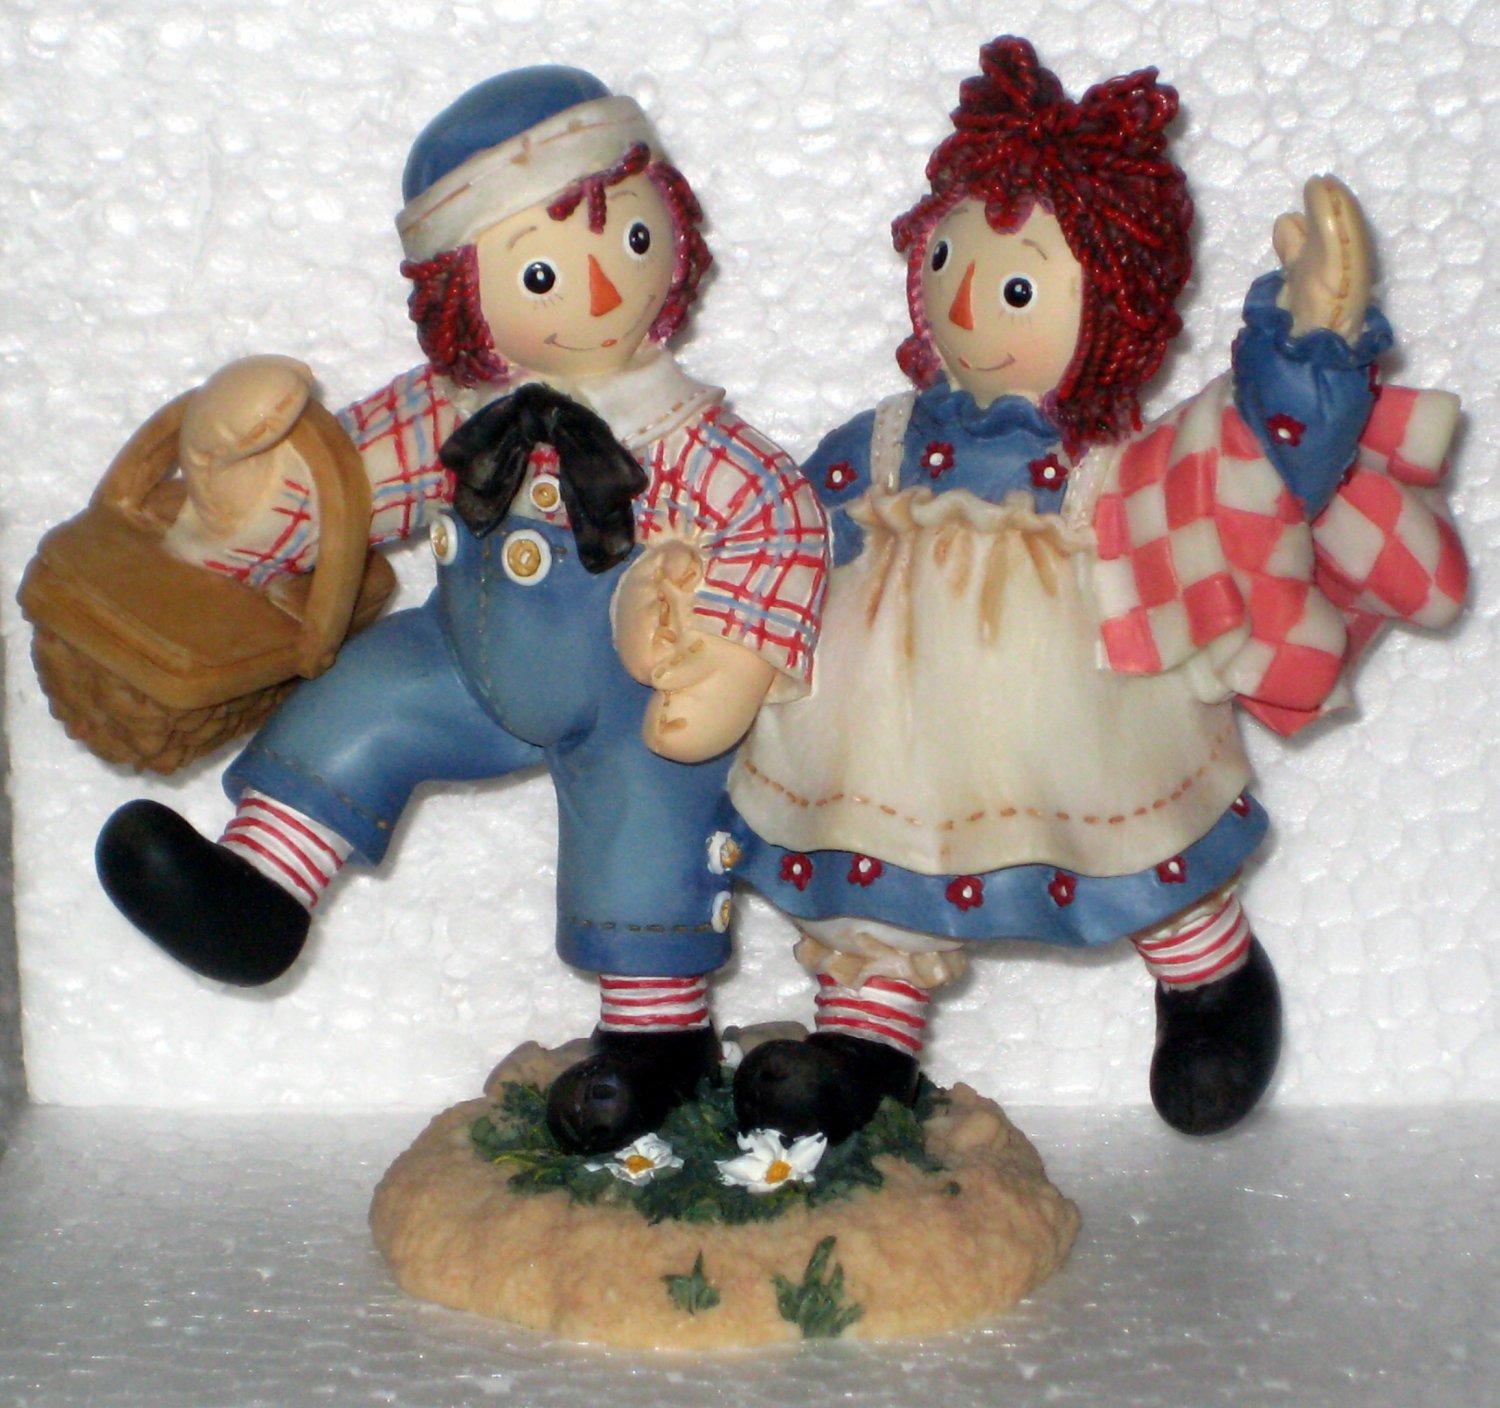 How Nice To Have Such A Happy Sunny Friend Raggedy Ann Andy Resin Figurine 677744 Enesco Picnic NIB